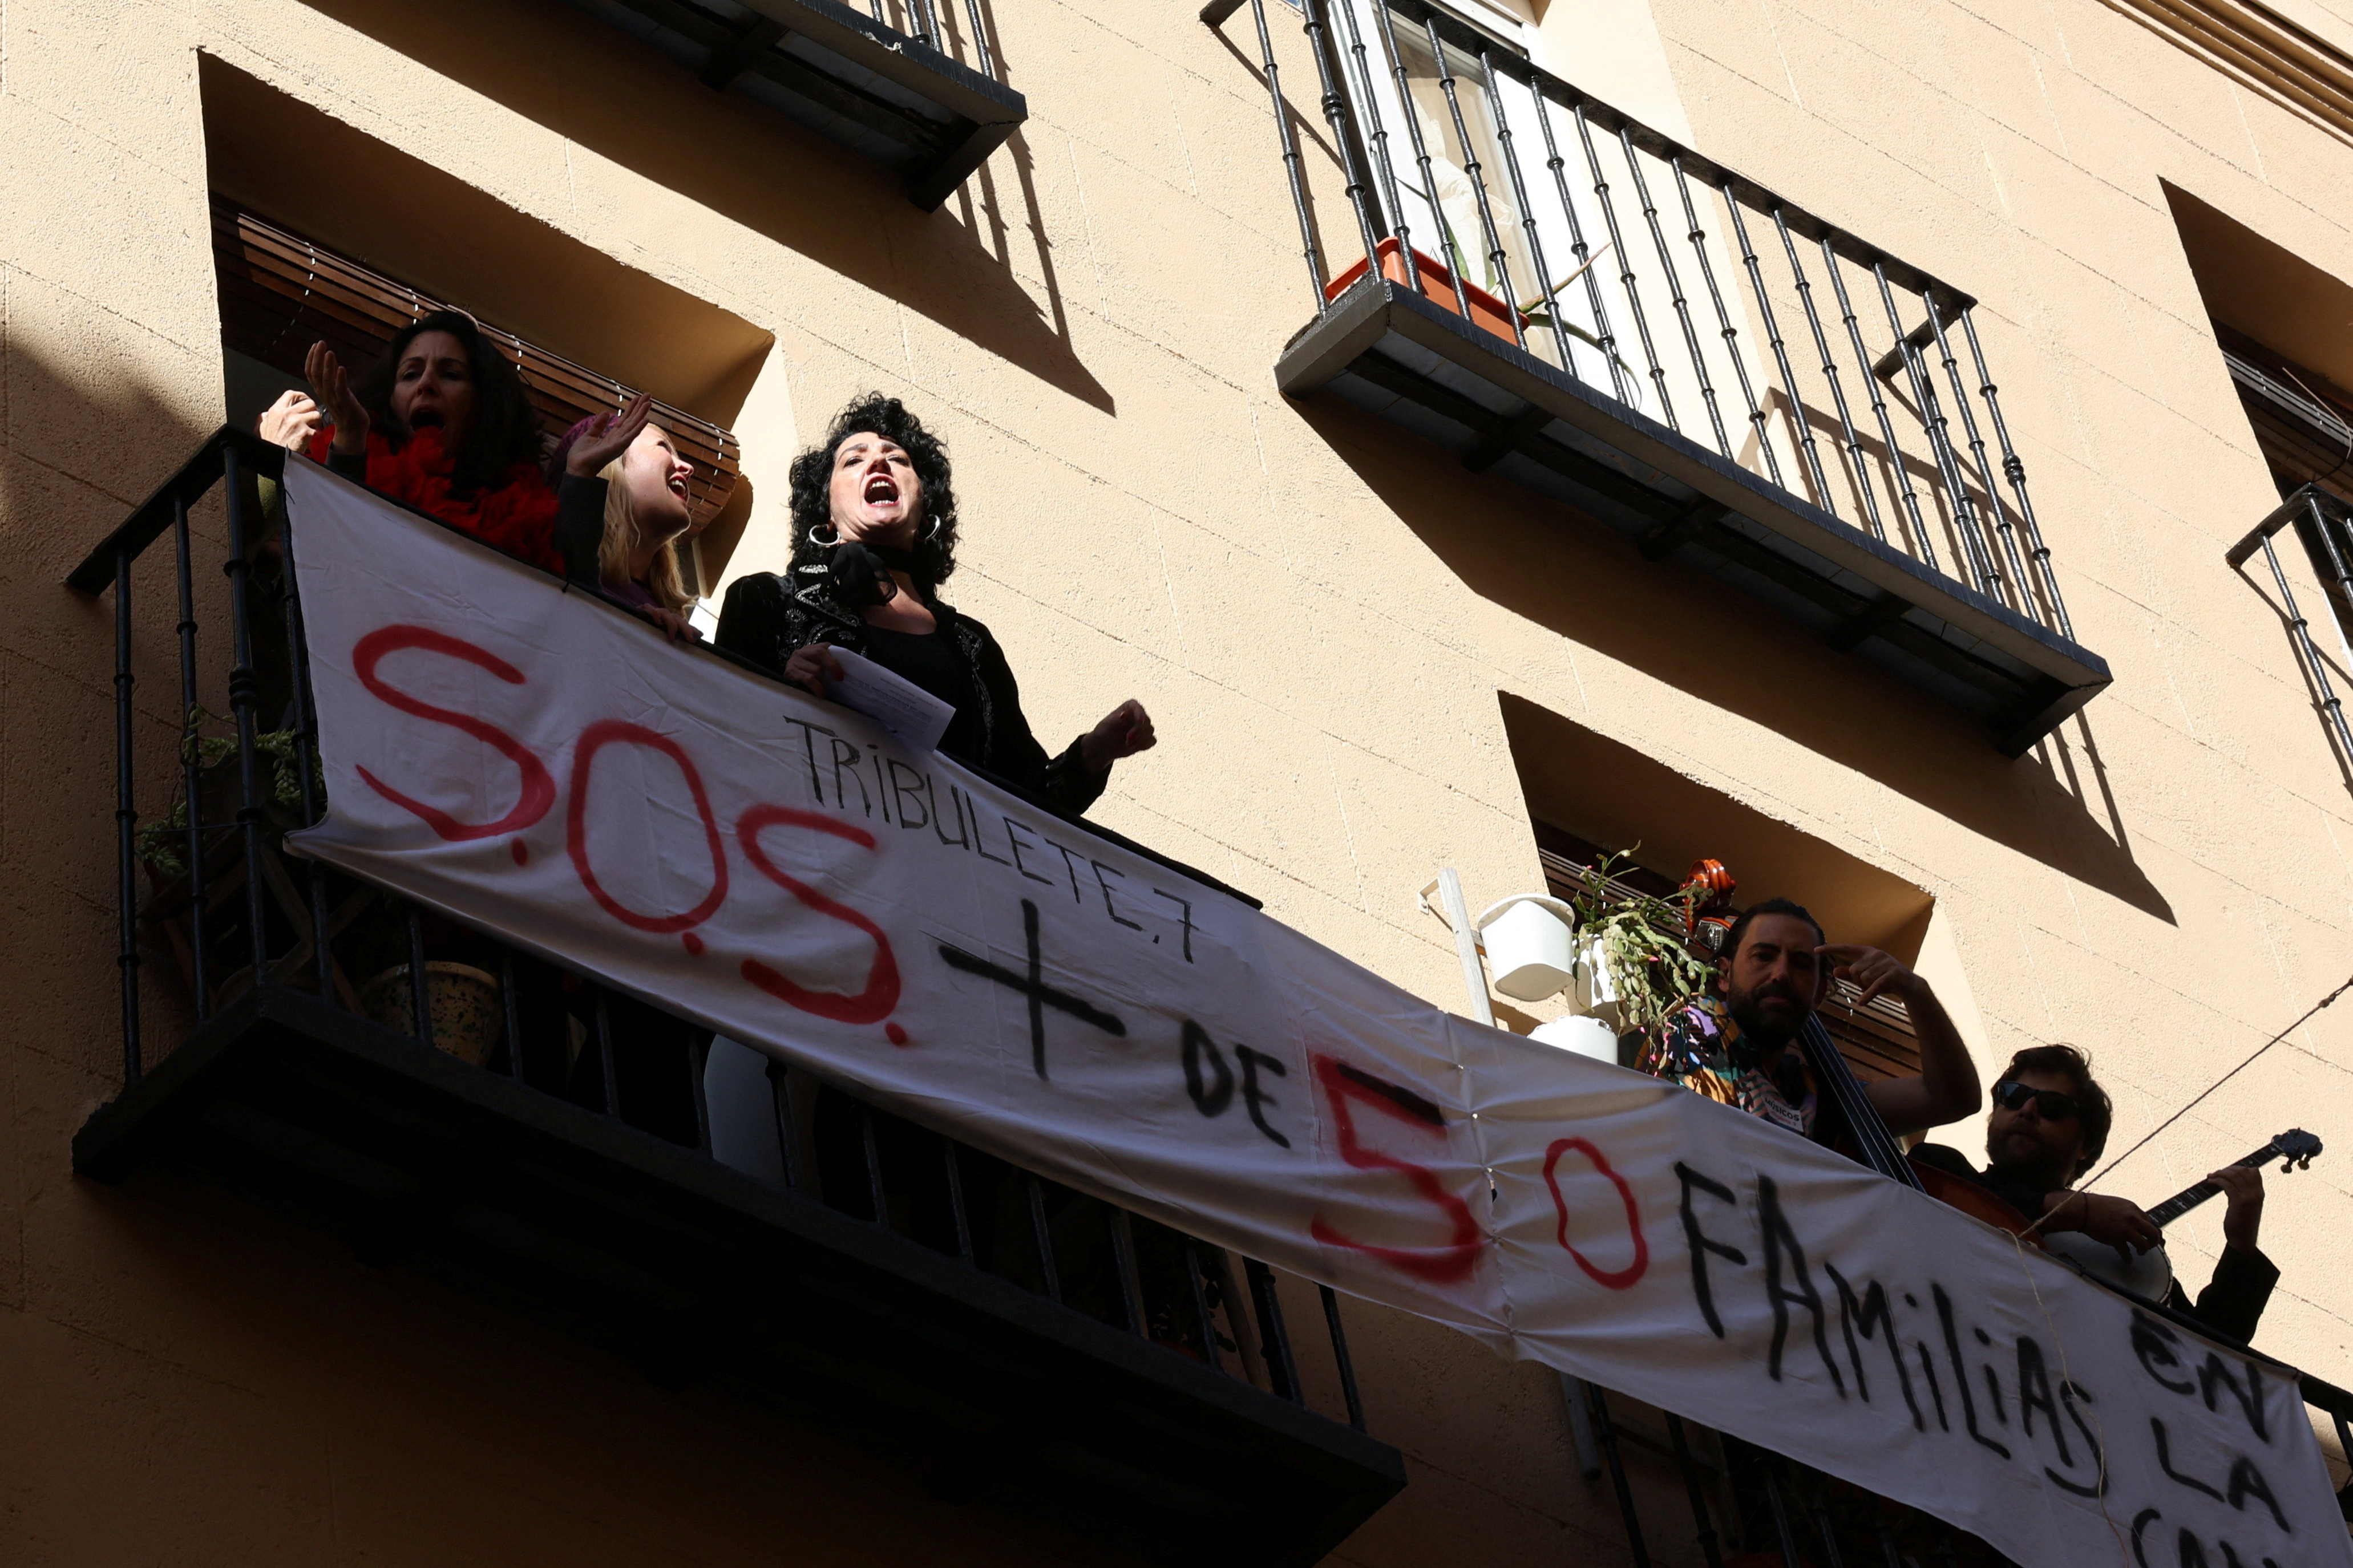 Artists perform during a protest action, in a balcony facing a building whose residents fear they will be evicted in the event of its purchase by a real estate investment fund, in Madrid